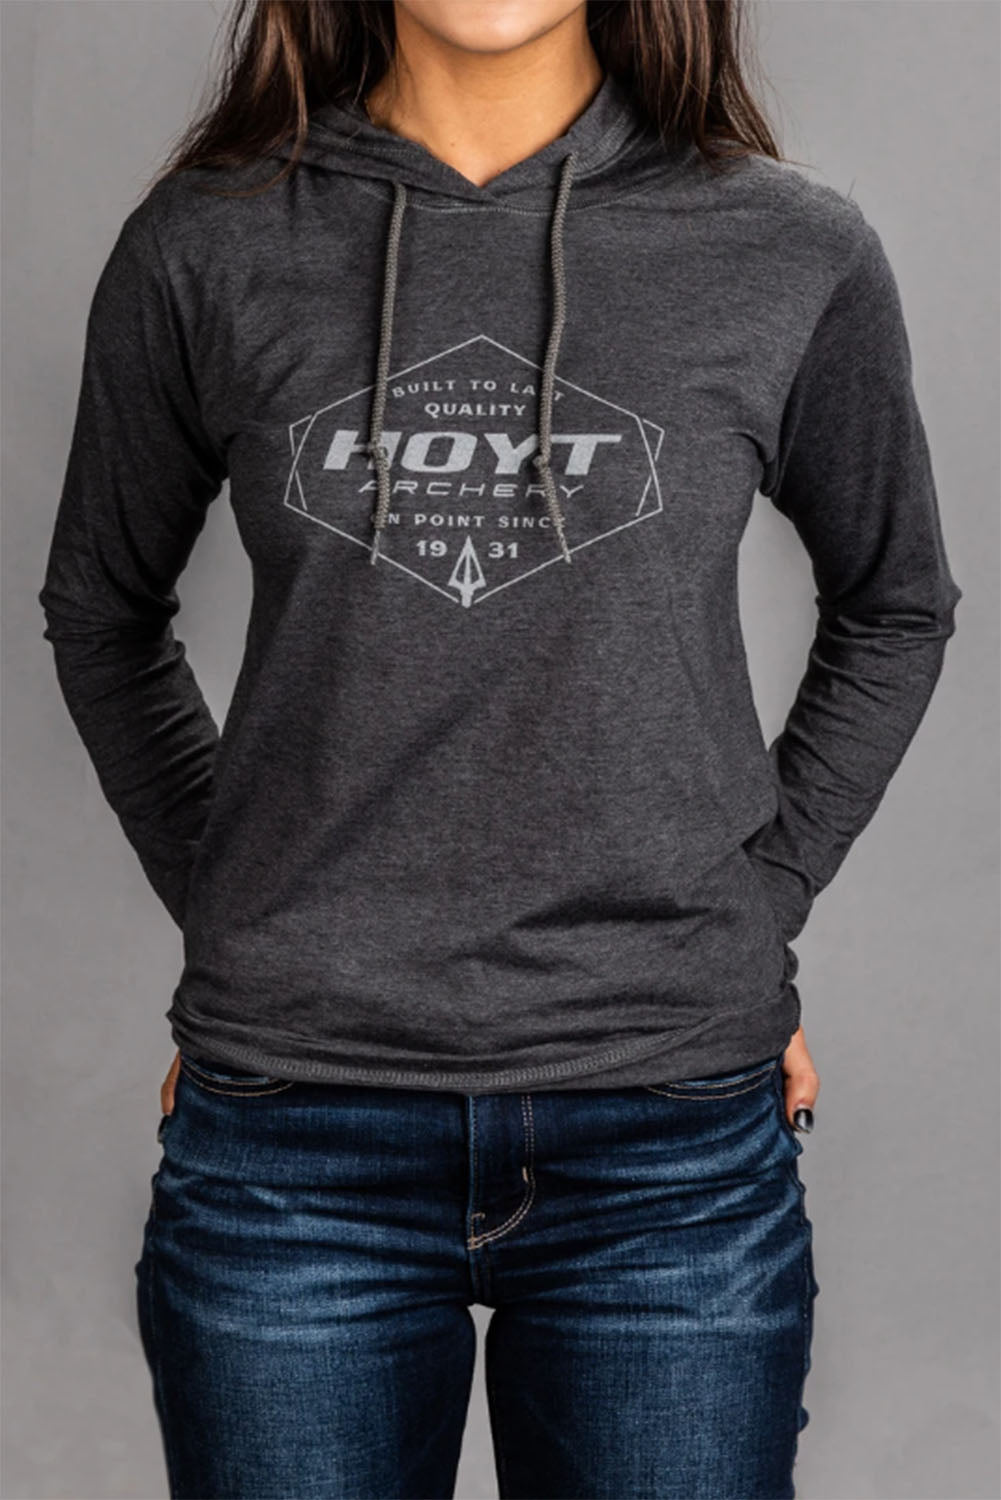 Hoyt Ladies On Point Hooded Long-Sleeved Shirt